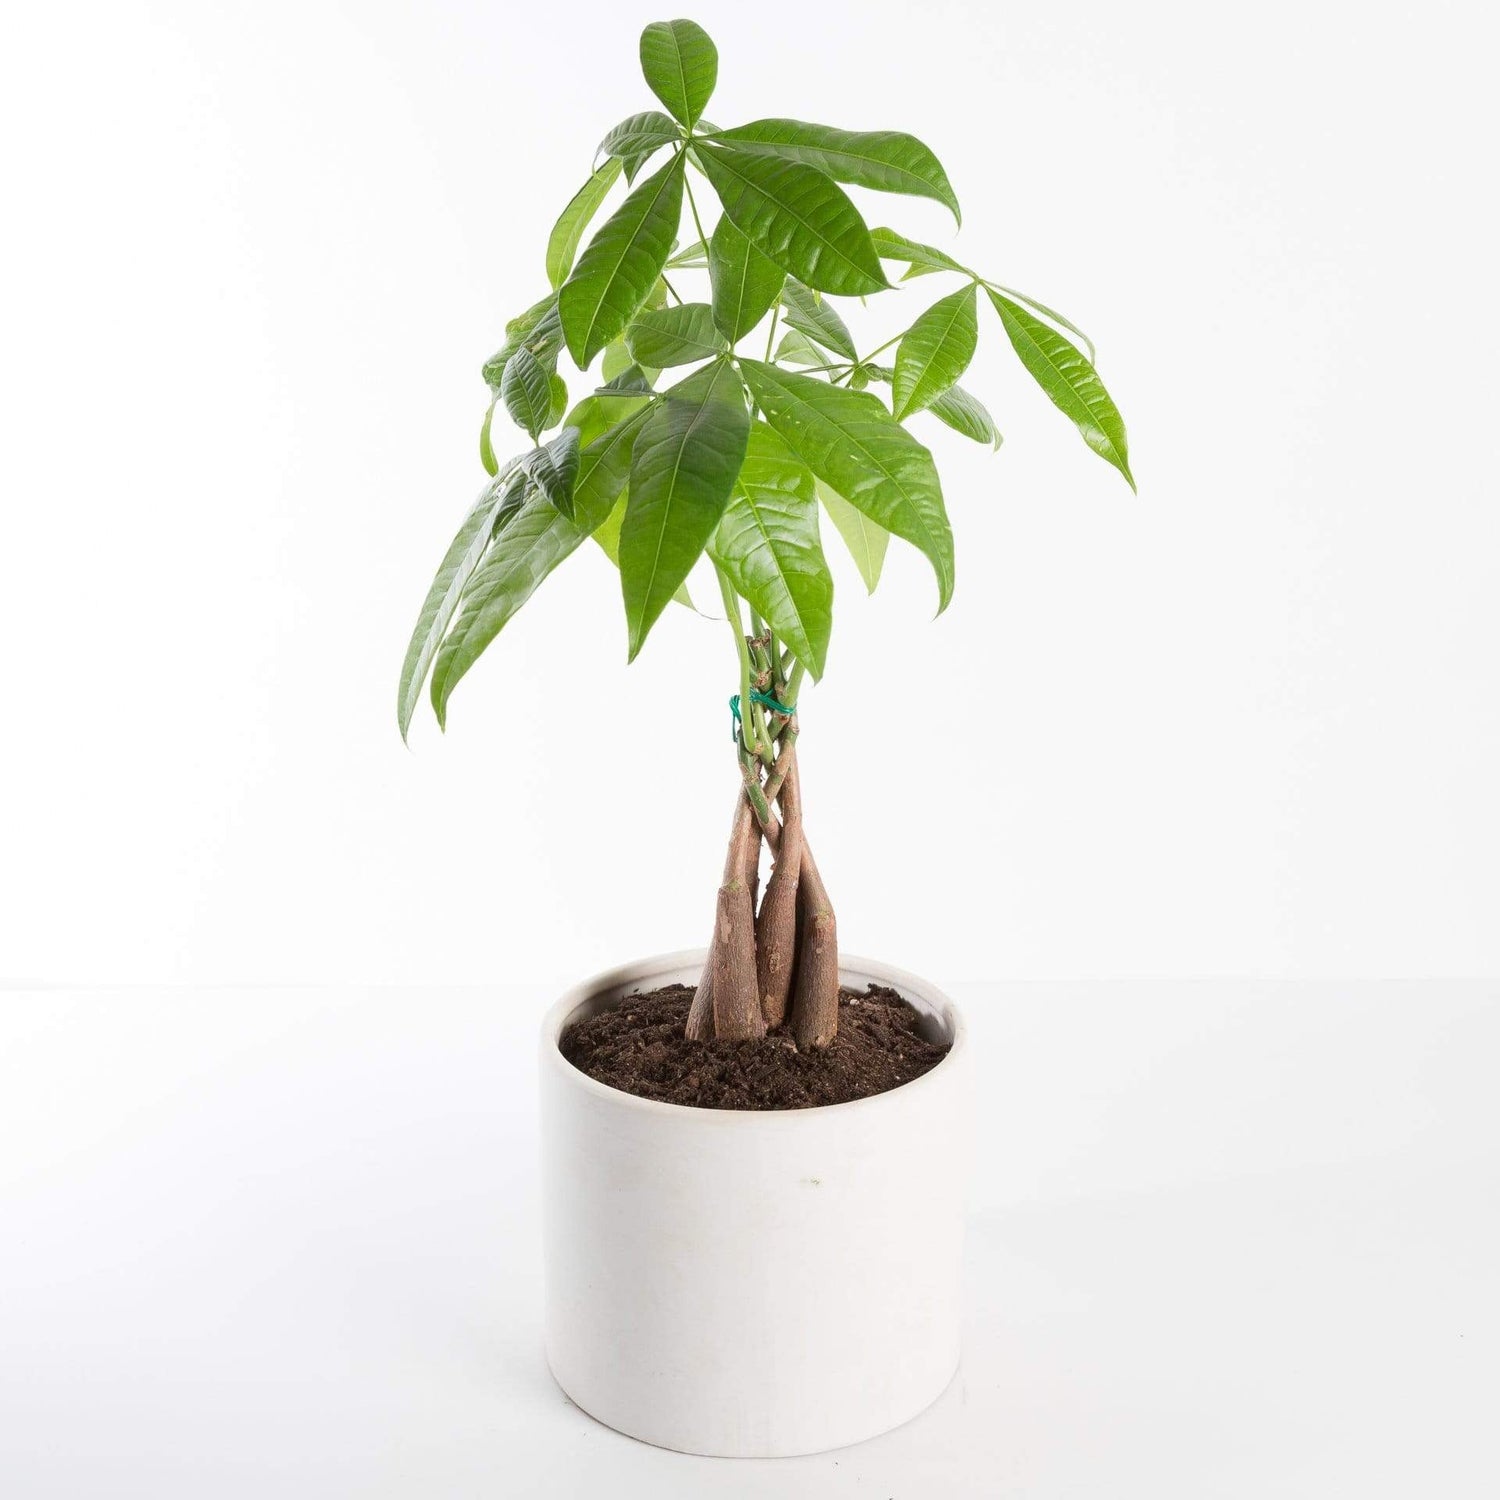 Urban Sprouts Plant 6" in nursery pot Money Tree 'Braided'